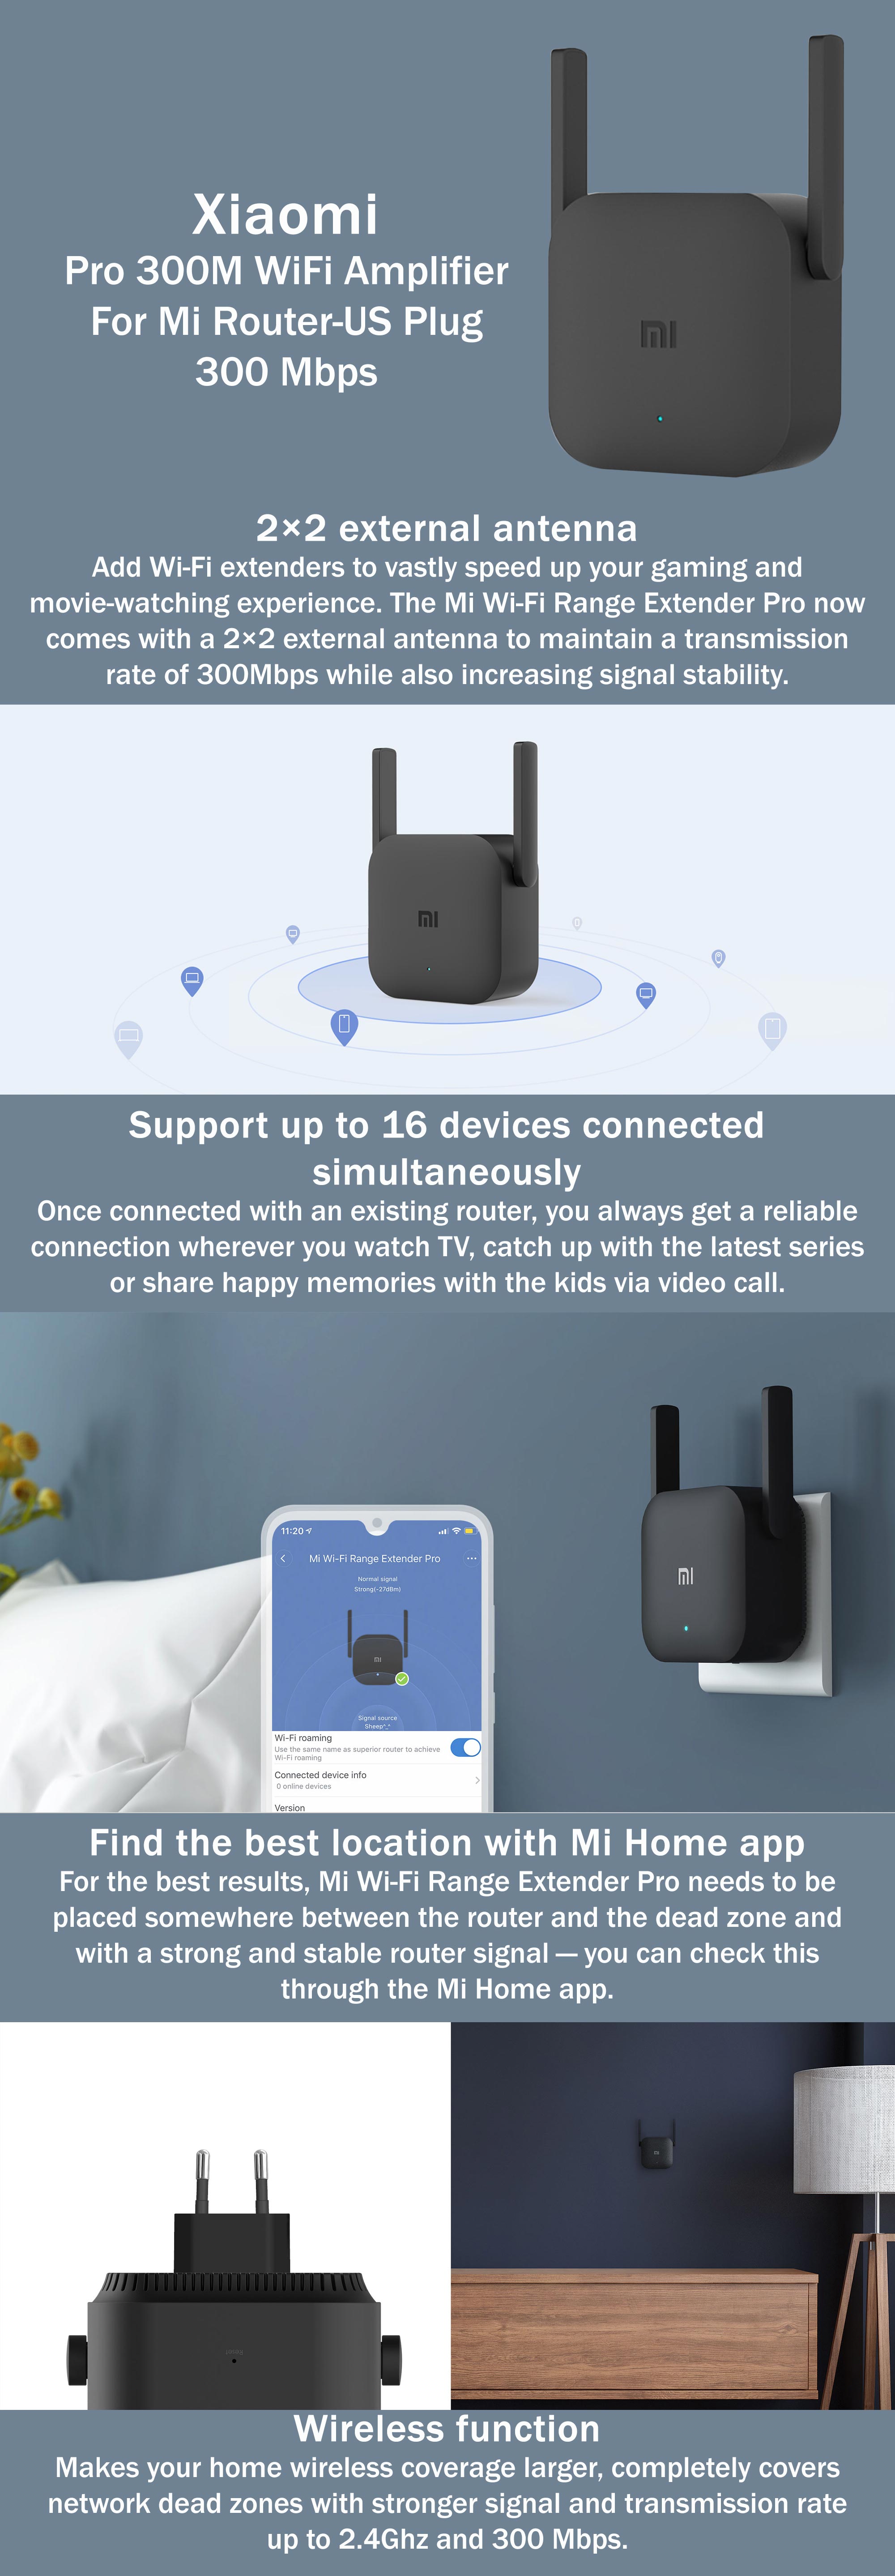 300Mbps Black Wifi Mi to Network External & Extender 2 16 Expander/ Repeater, Cairo, Up / Range Xiaomi Wi-Fi Up Giza Antenna/ Plug | Egypt to / devices Connectivity Play Pro